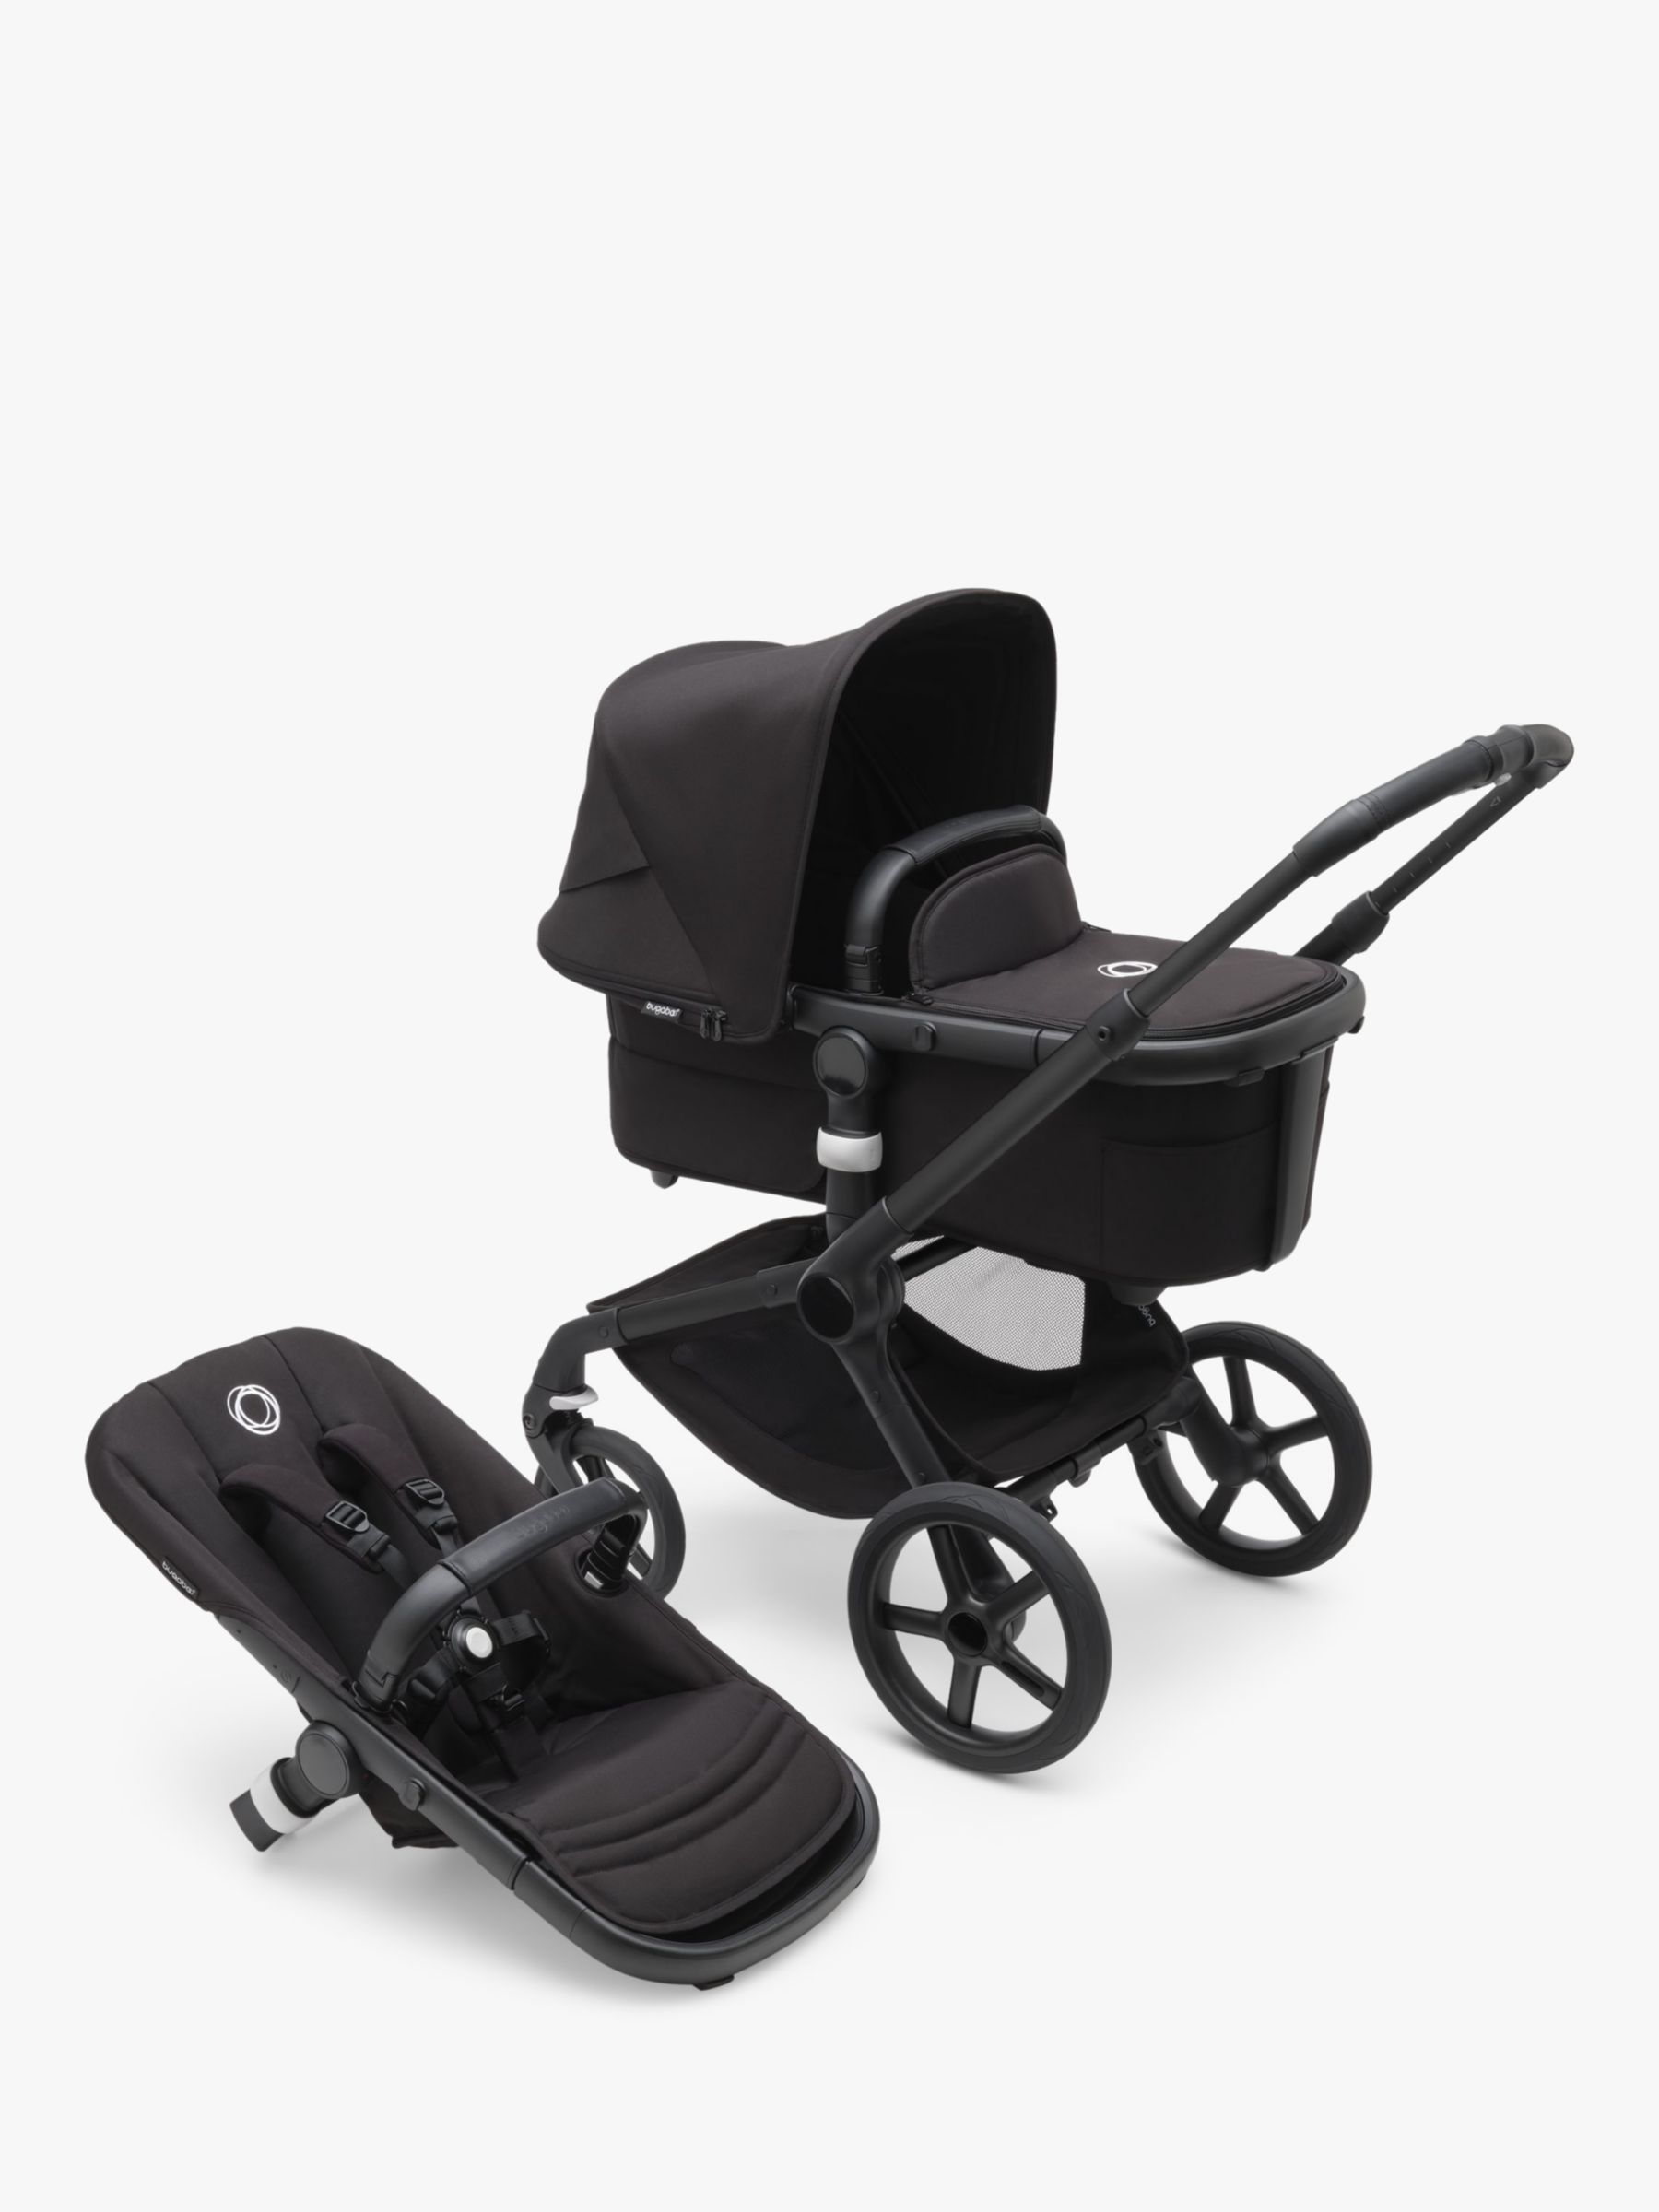 The Bugaboo Butterfly  John Lewis & Partners